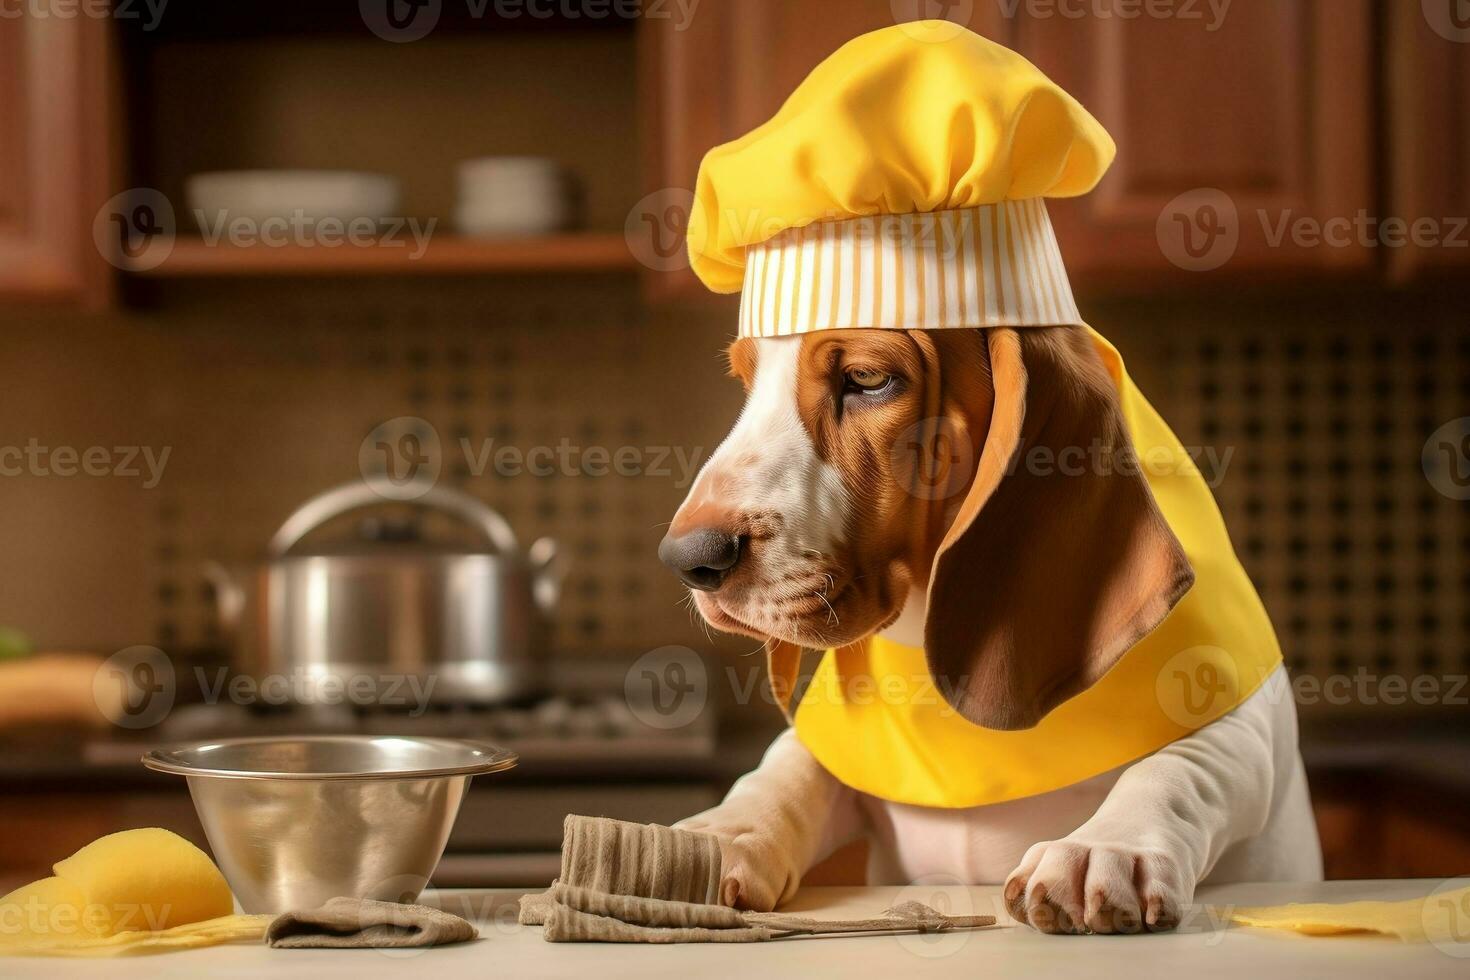 A brown and white Basset Hound dog wearing a white chef's hat stands on a kitchen countertop, prepping food for cooking photo